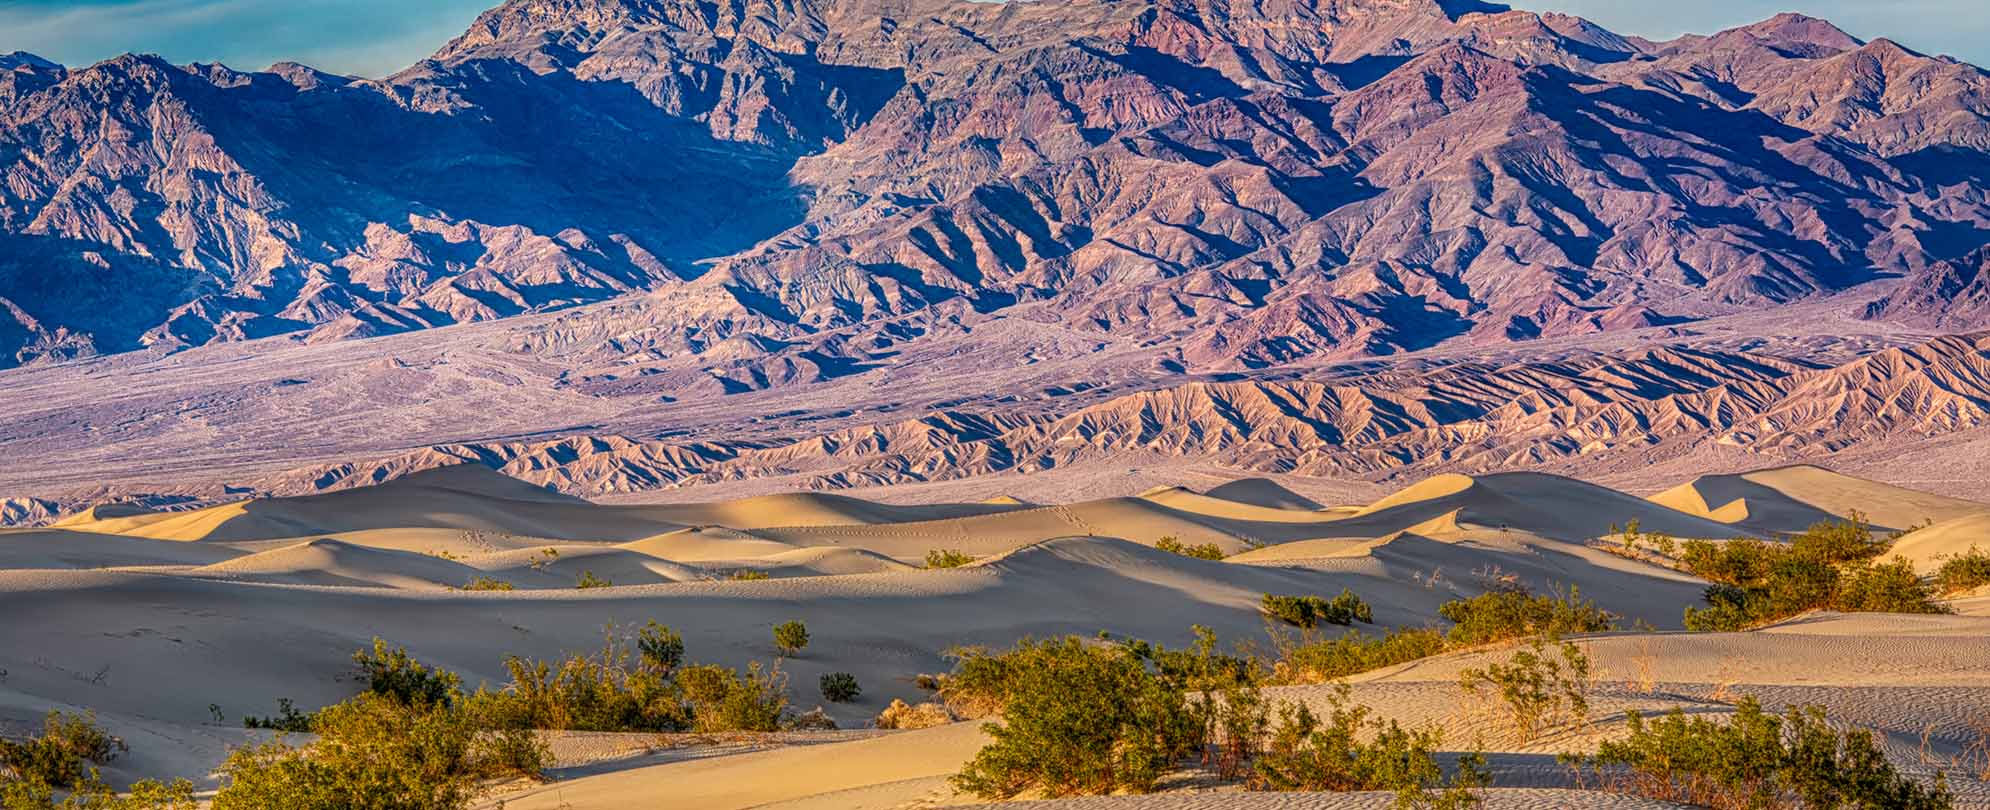 Mountains and sand at Death Valley National Park.